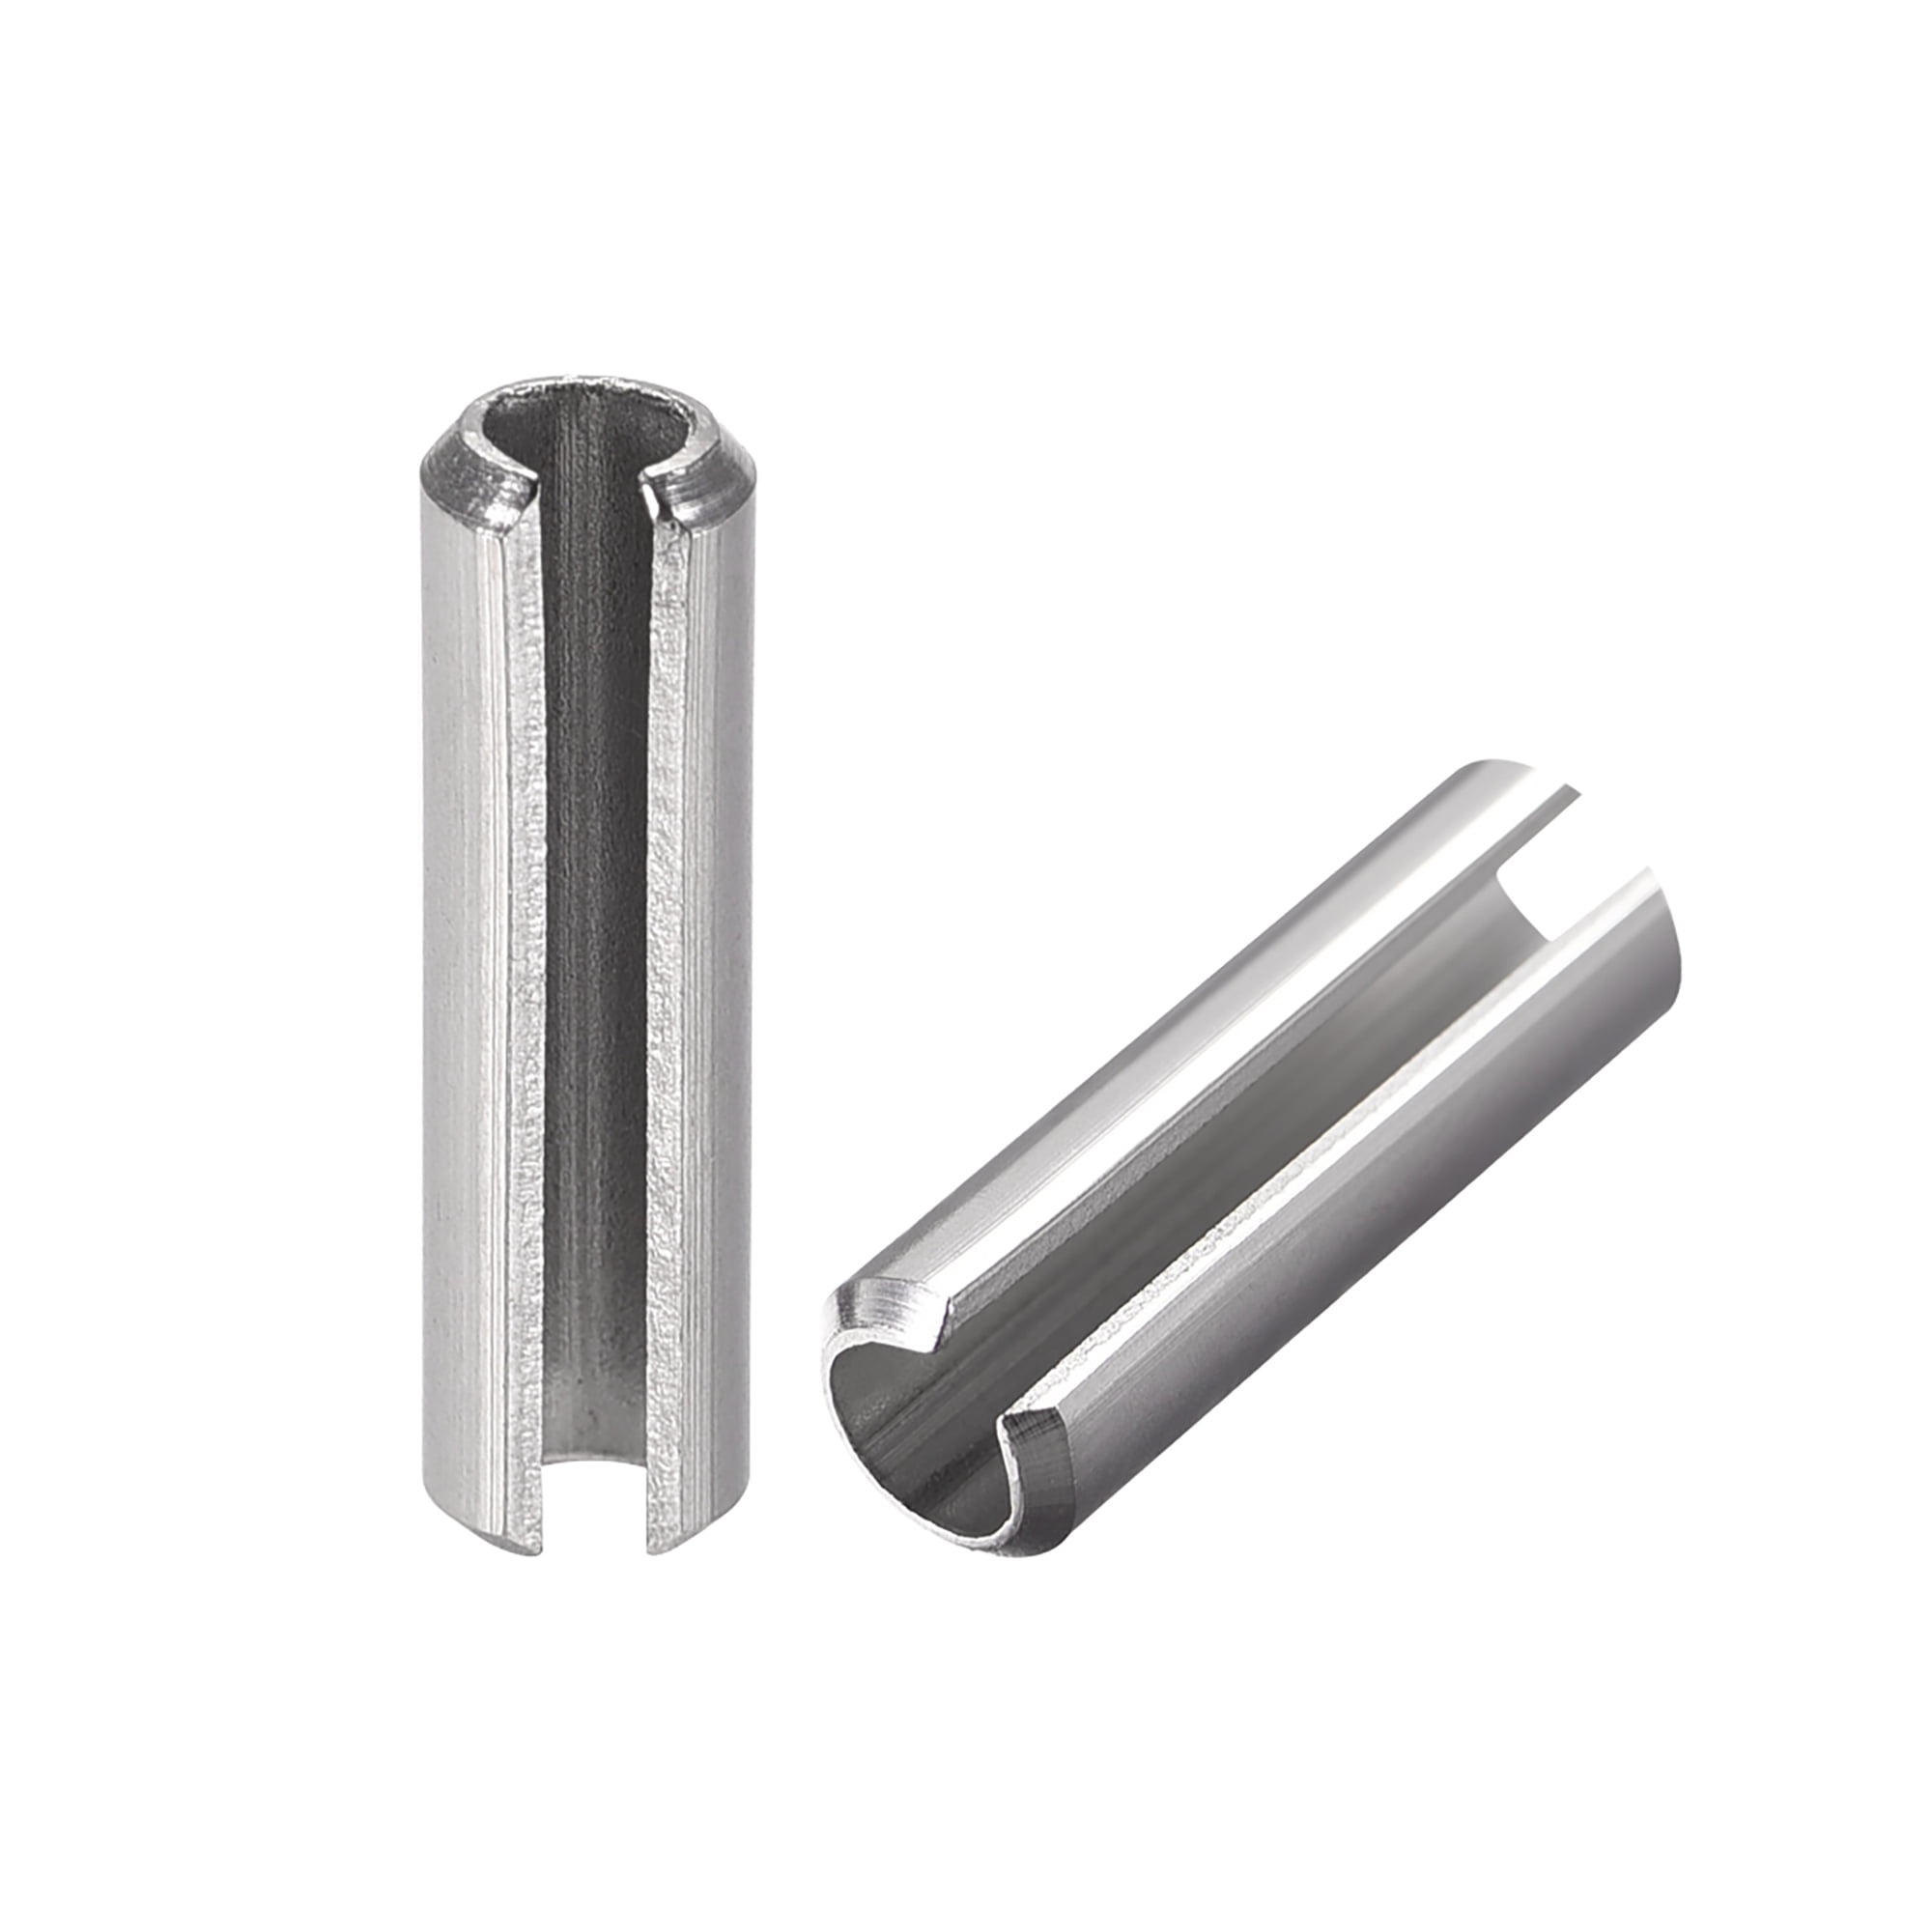 PACK OF 2 NEW 3/8" X 1 7/8" 420 STAINLESS STEEL ROLL PIN SLOTTED FREE SHIP NH 